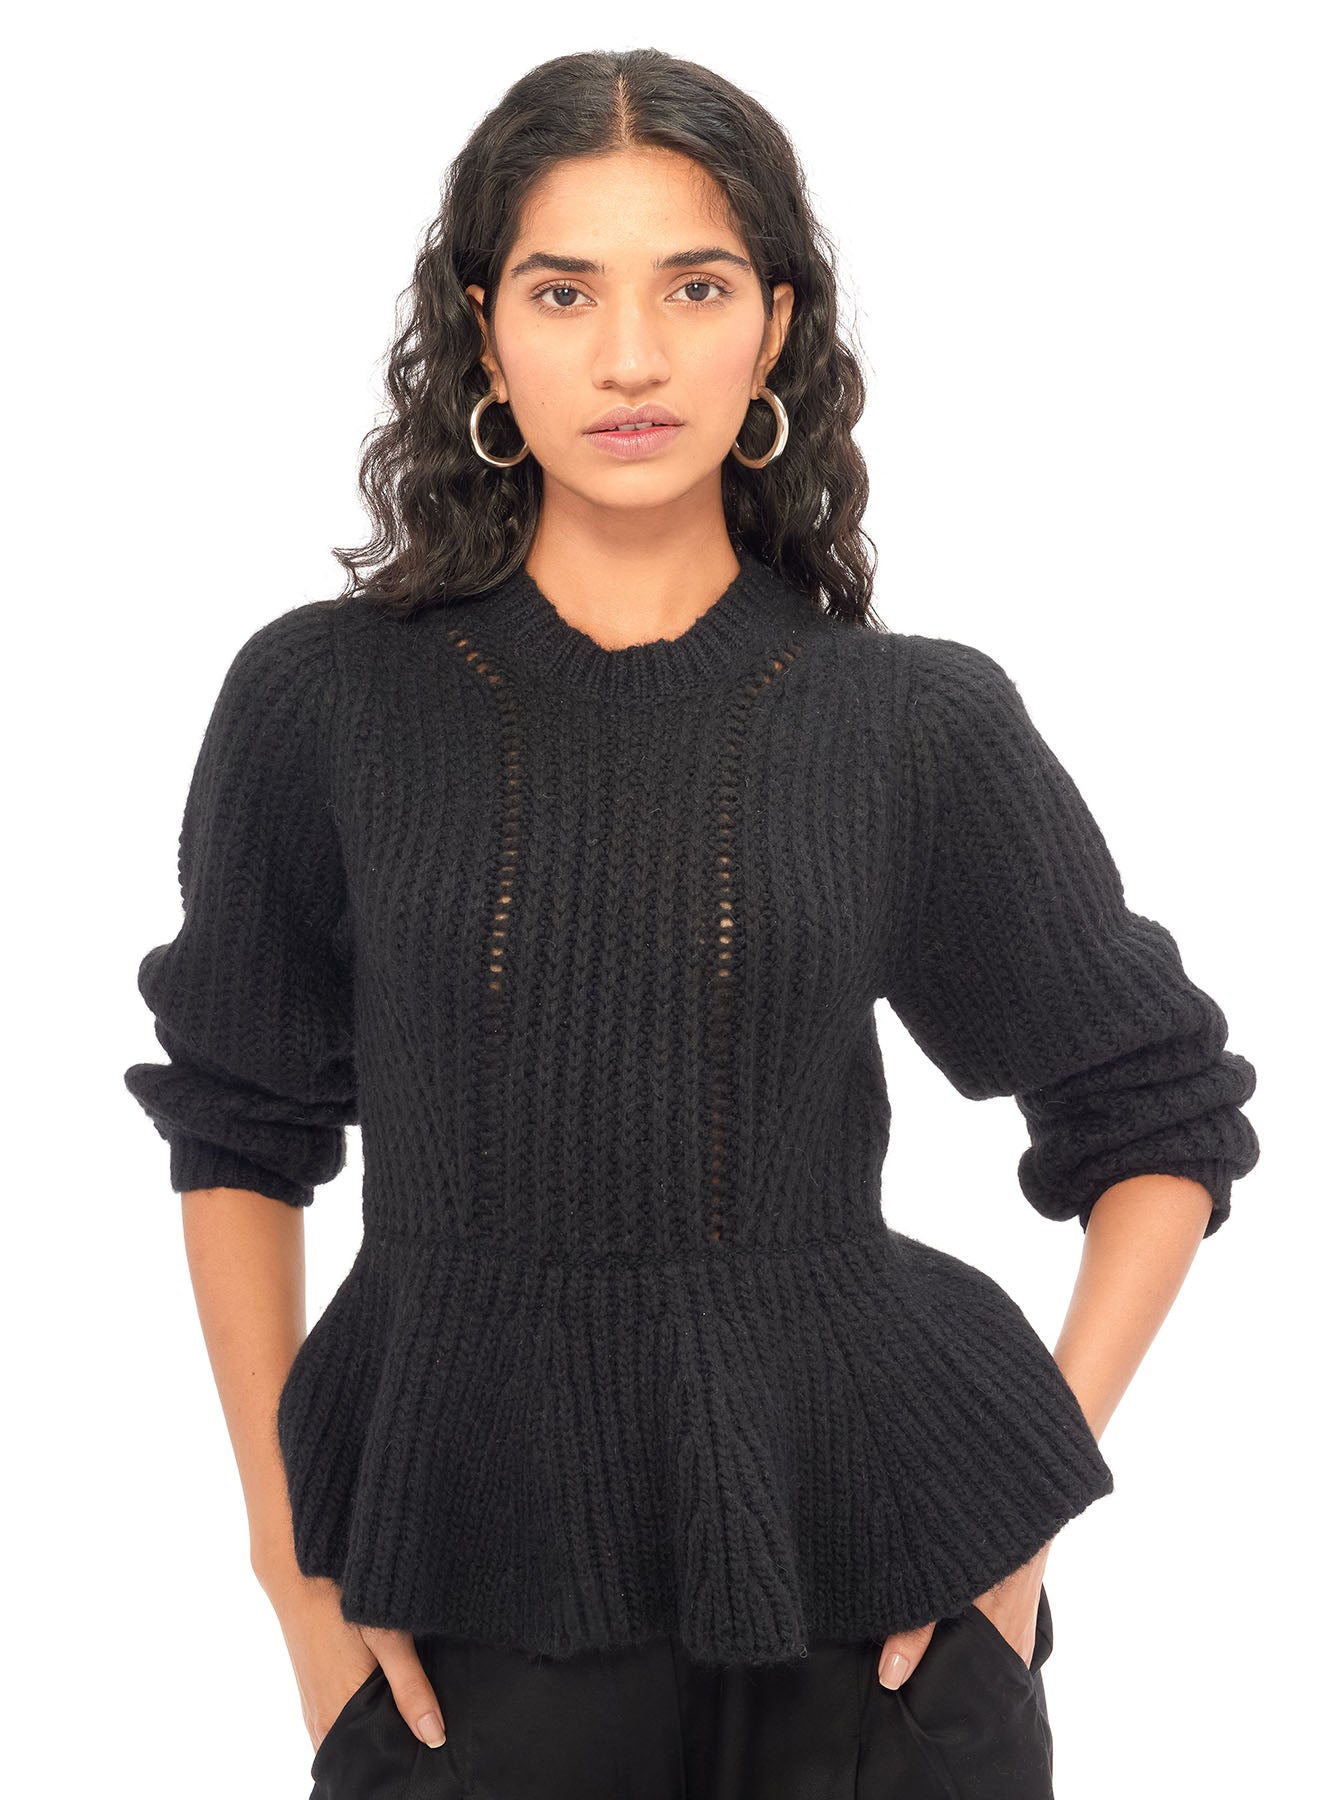 A stunning, incredibly soft hand knit baby alpaca sweater in rich black. This is cozy, yet dressy with the slight peplum style and beautiful knit details.